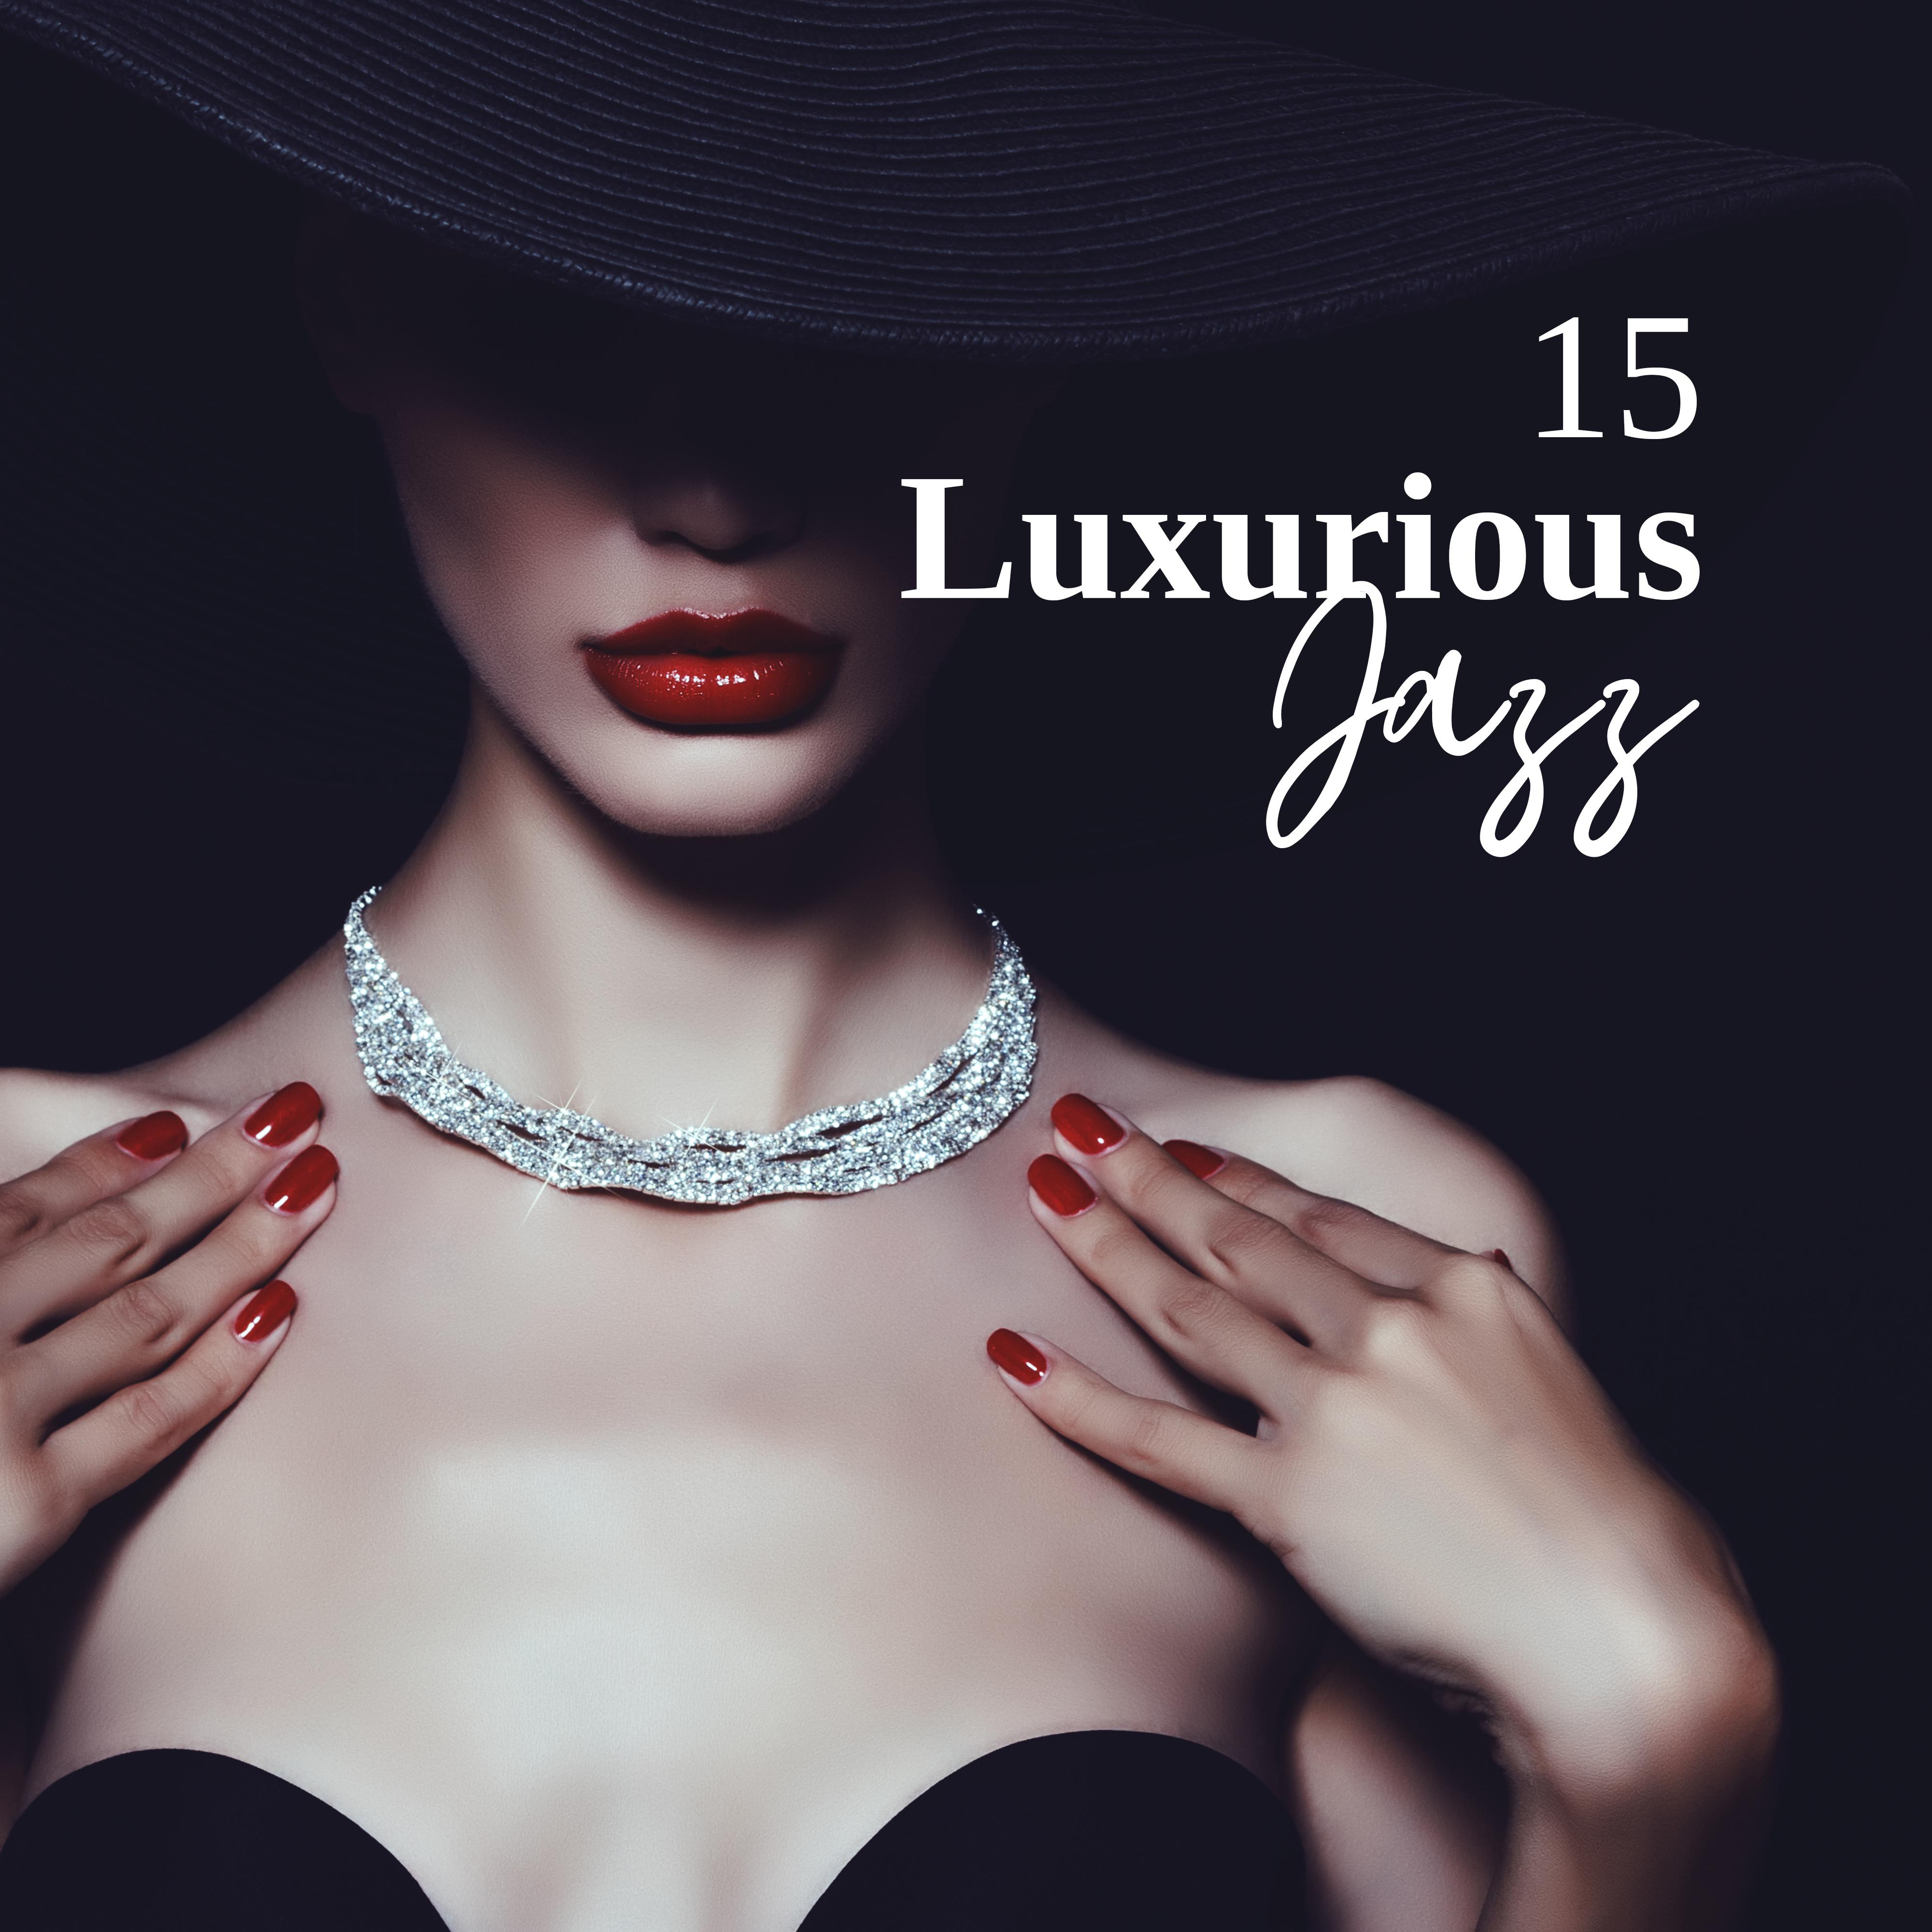 15 Luxurious Jazz  Restaurant Music, Elegant Sounds, Jazz Coffee, Calm Vibes, Dinner Music for Relaxation, Relaxing Background Jazz